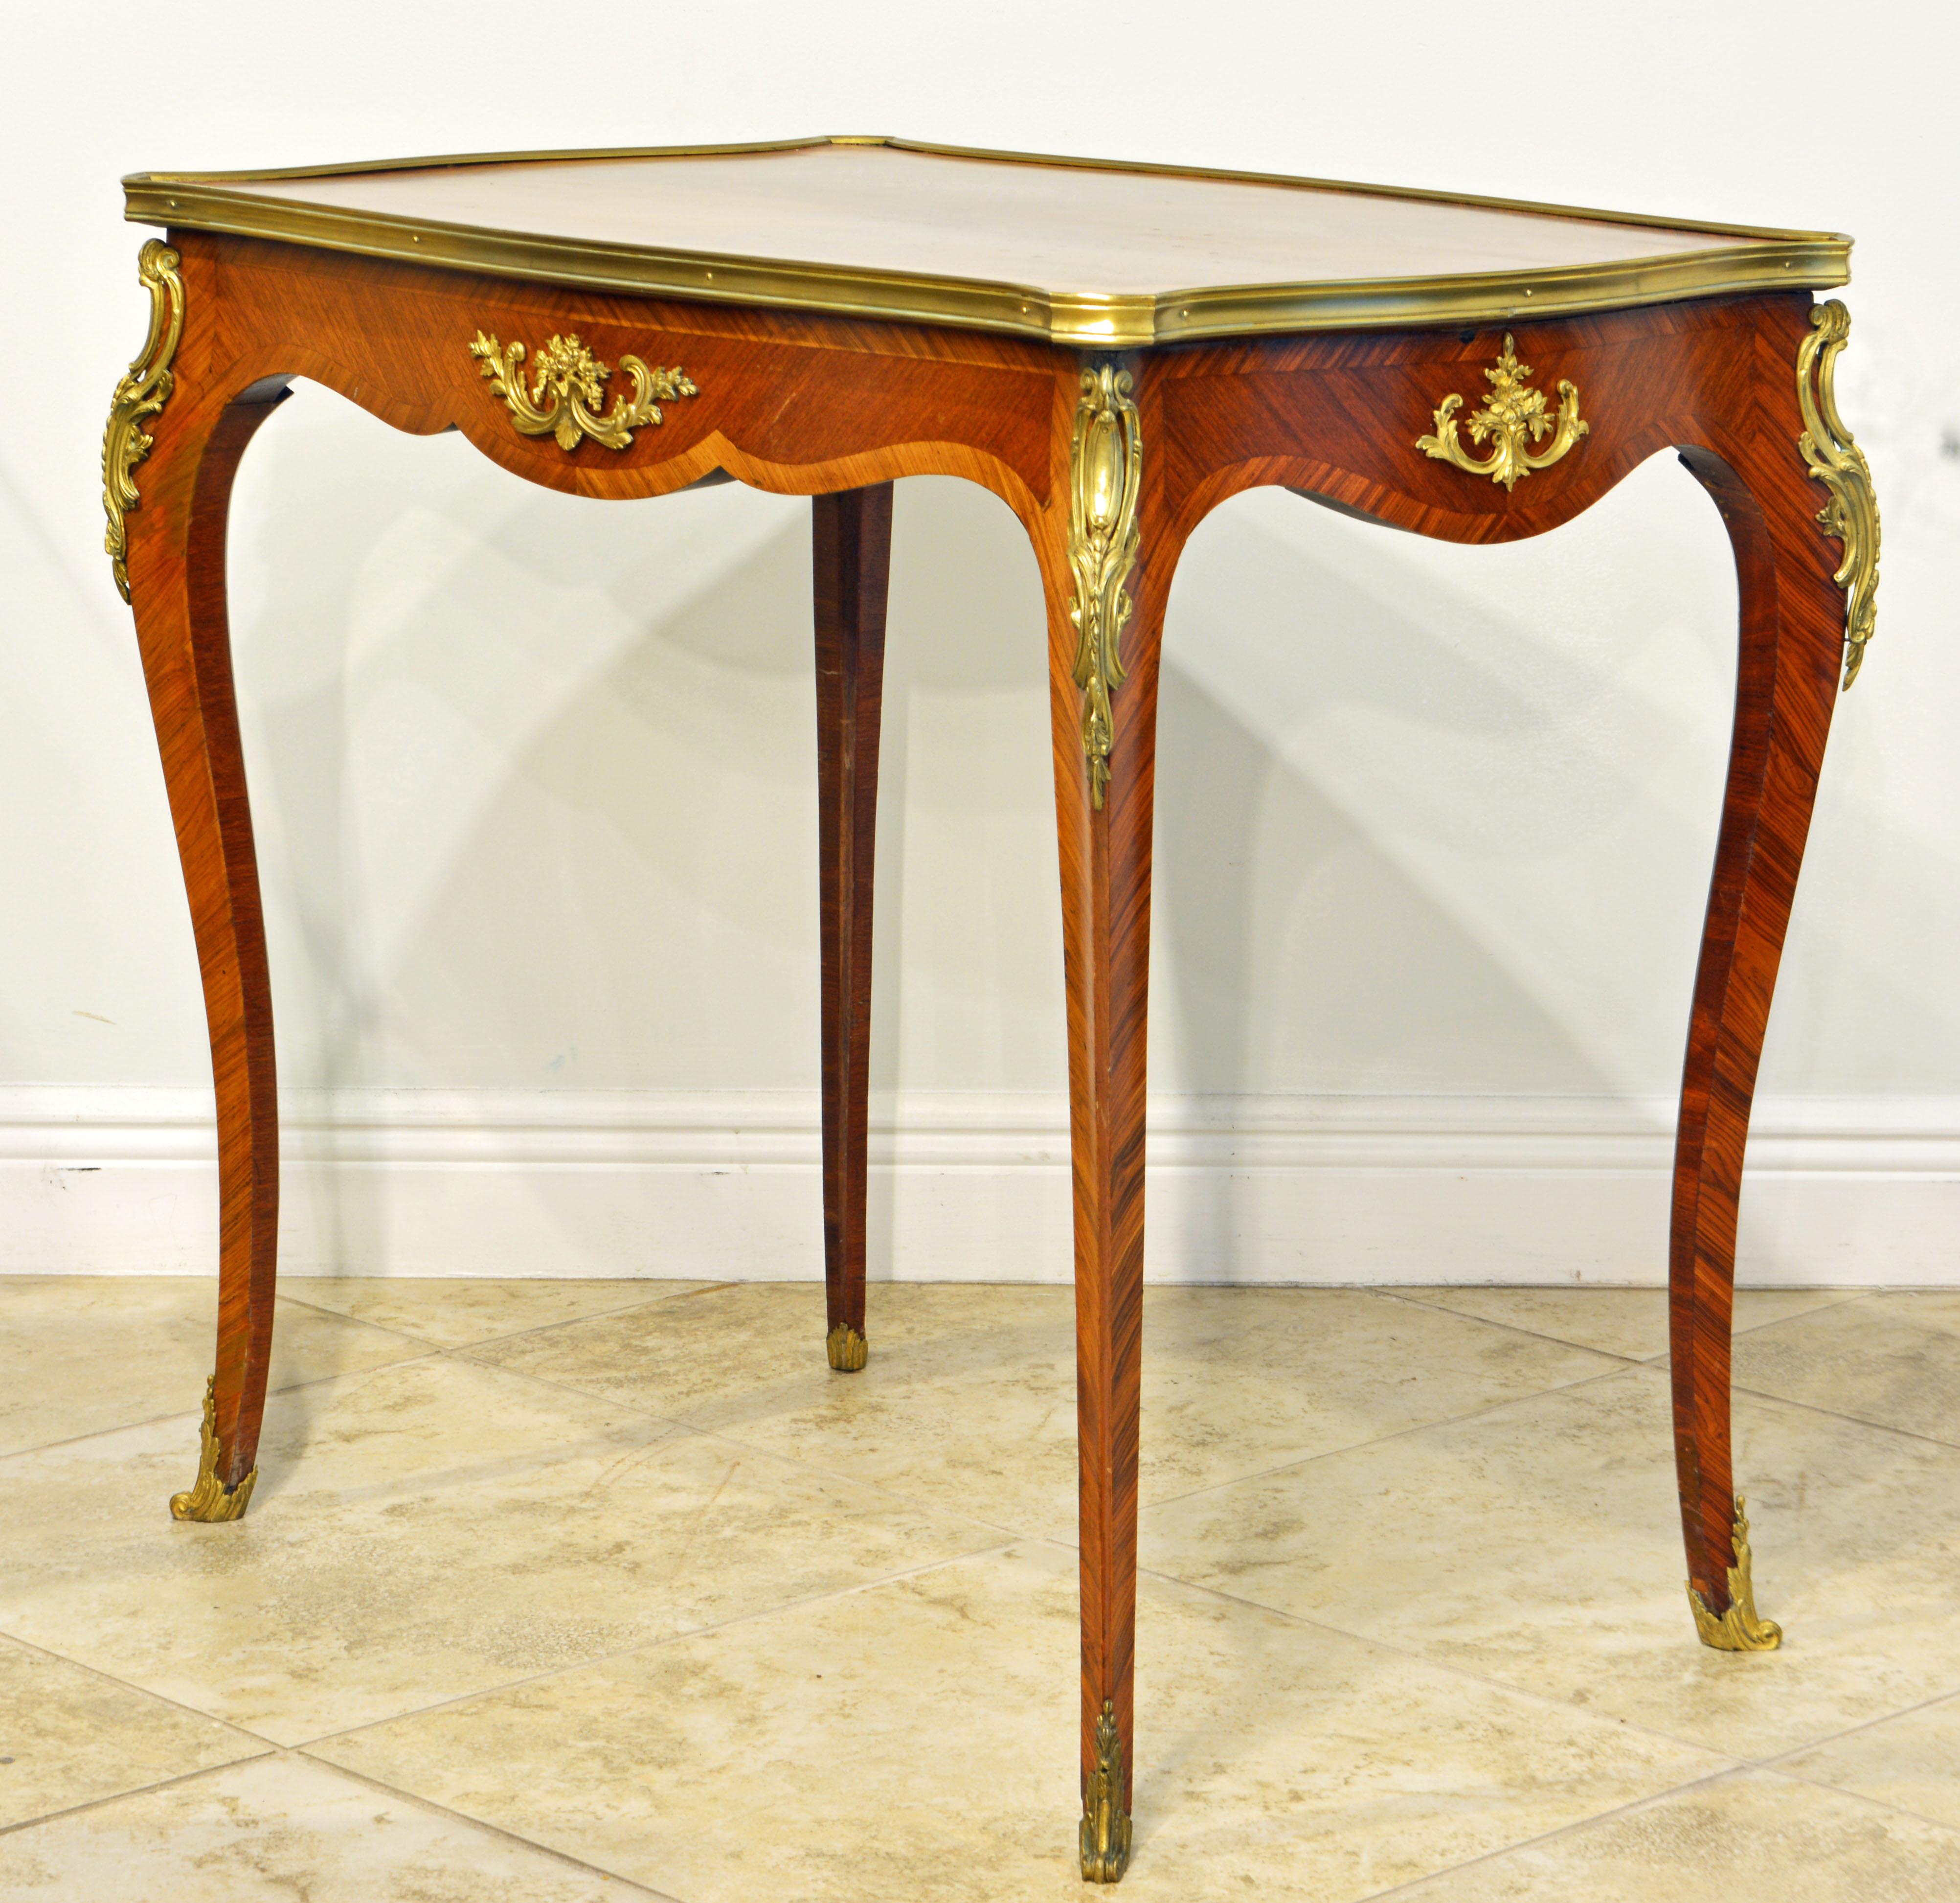 Gilt French Ormolu Mounted Louis XV Style Parquetry Table with Concealed Drawer